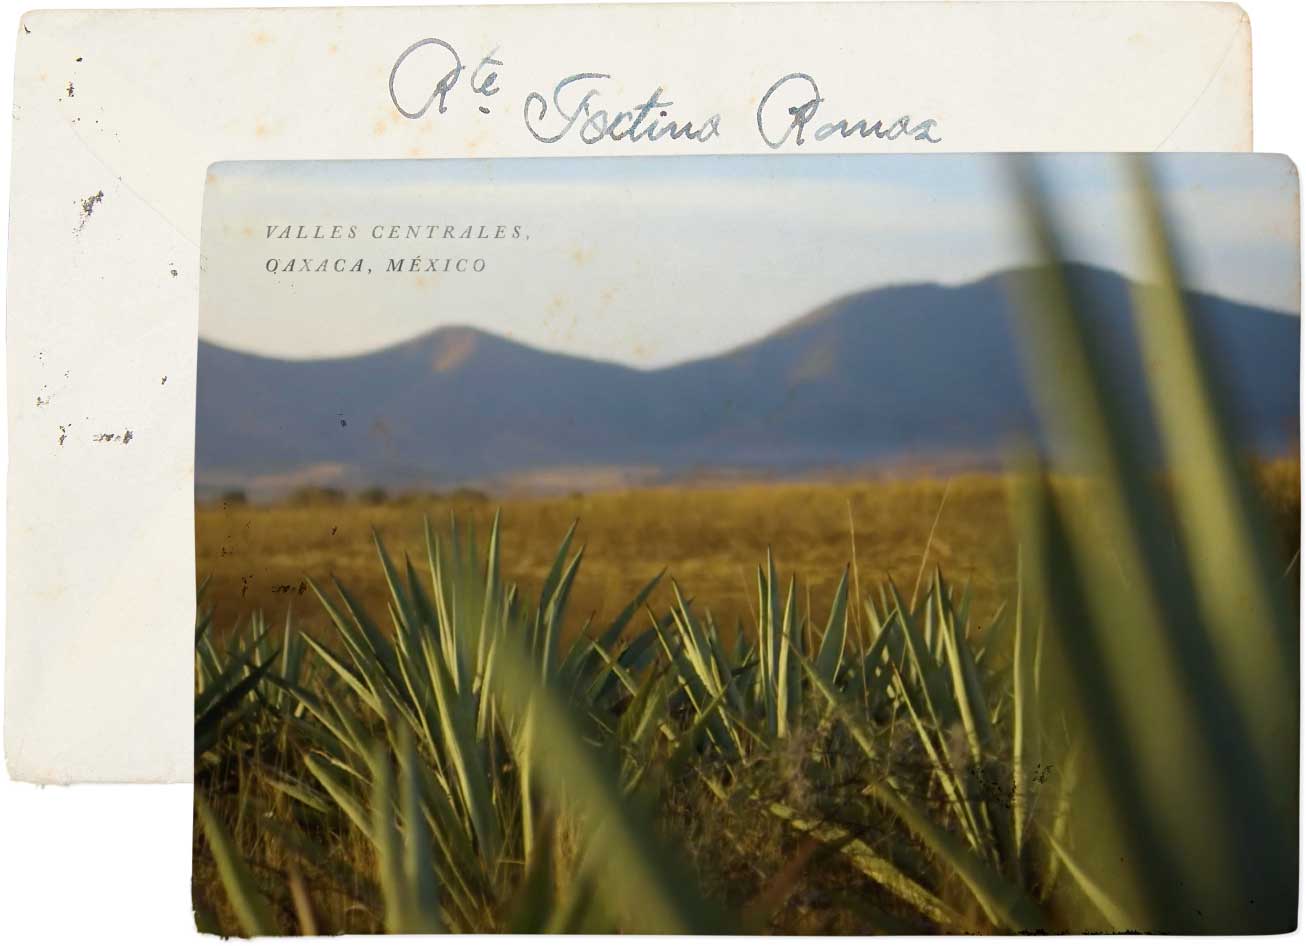 Photo of Valles Centrales de Oaxaca with lyrics and name of Fortino Ramos